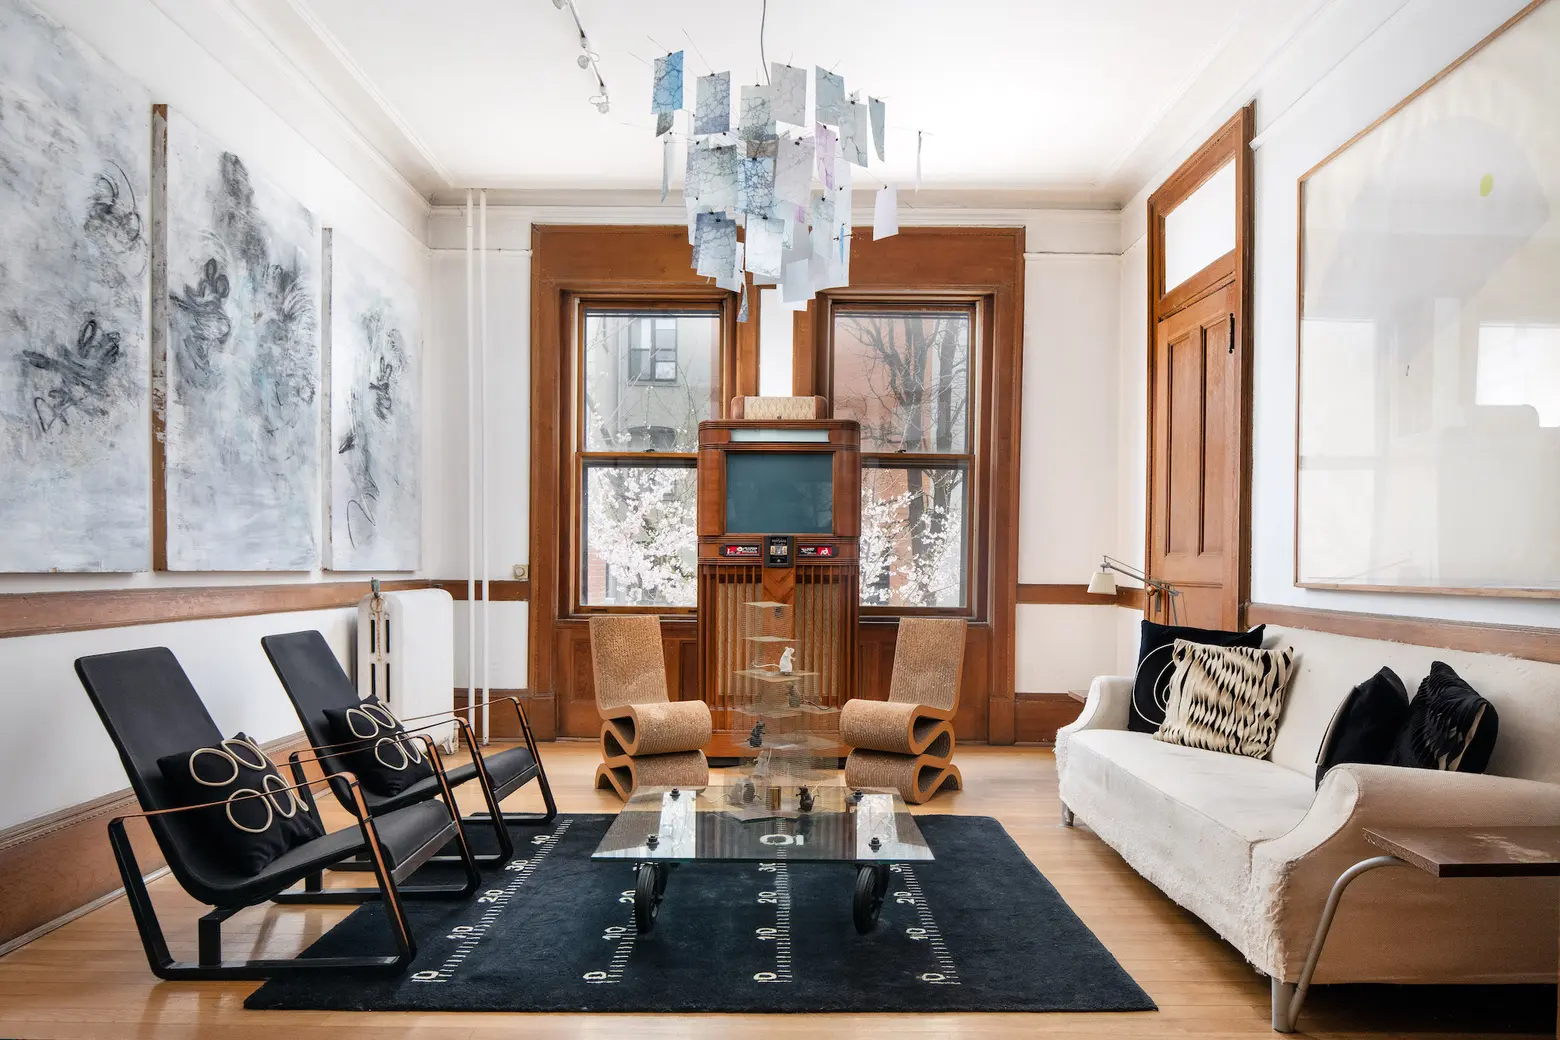 This colorful $3.25M Harlem townhouse was the home of DC Comics head Jenette Kahn